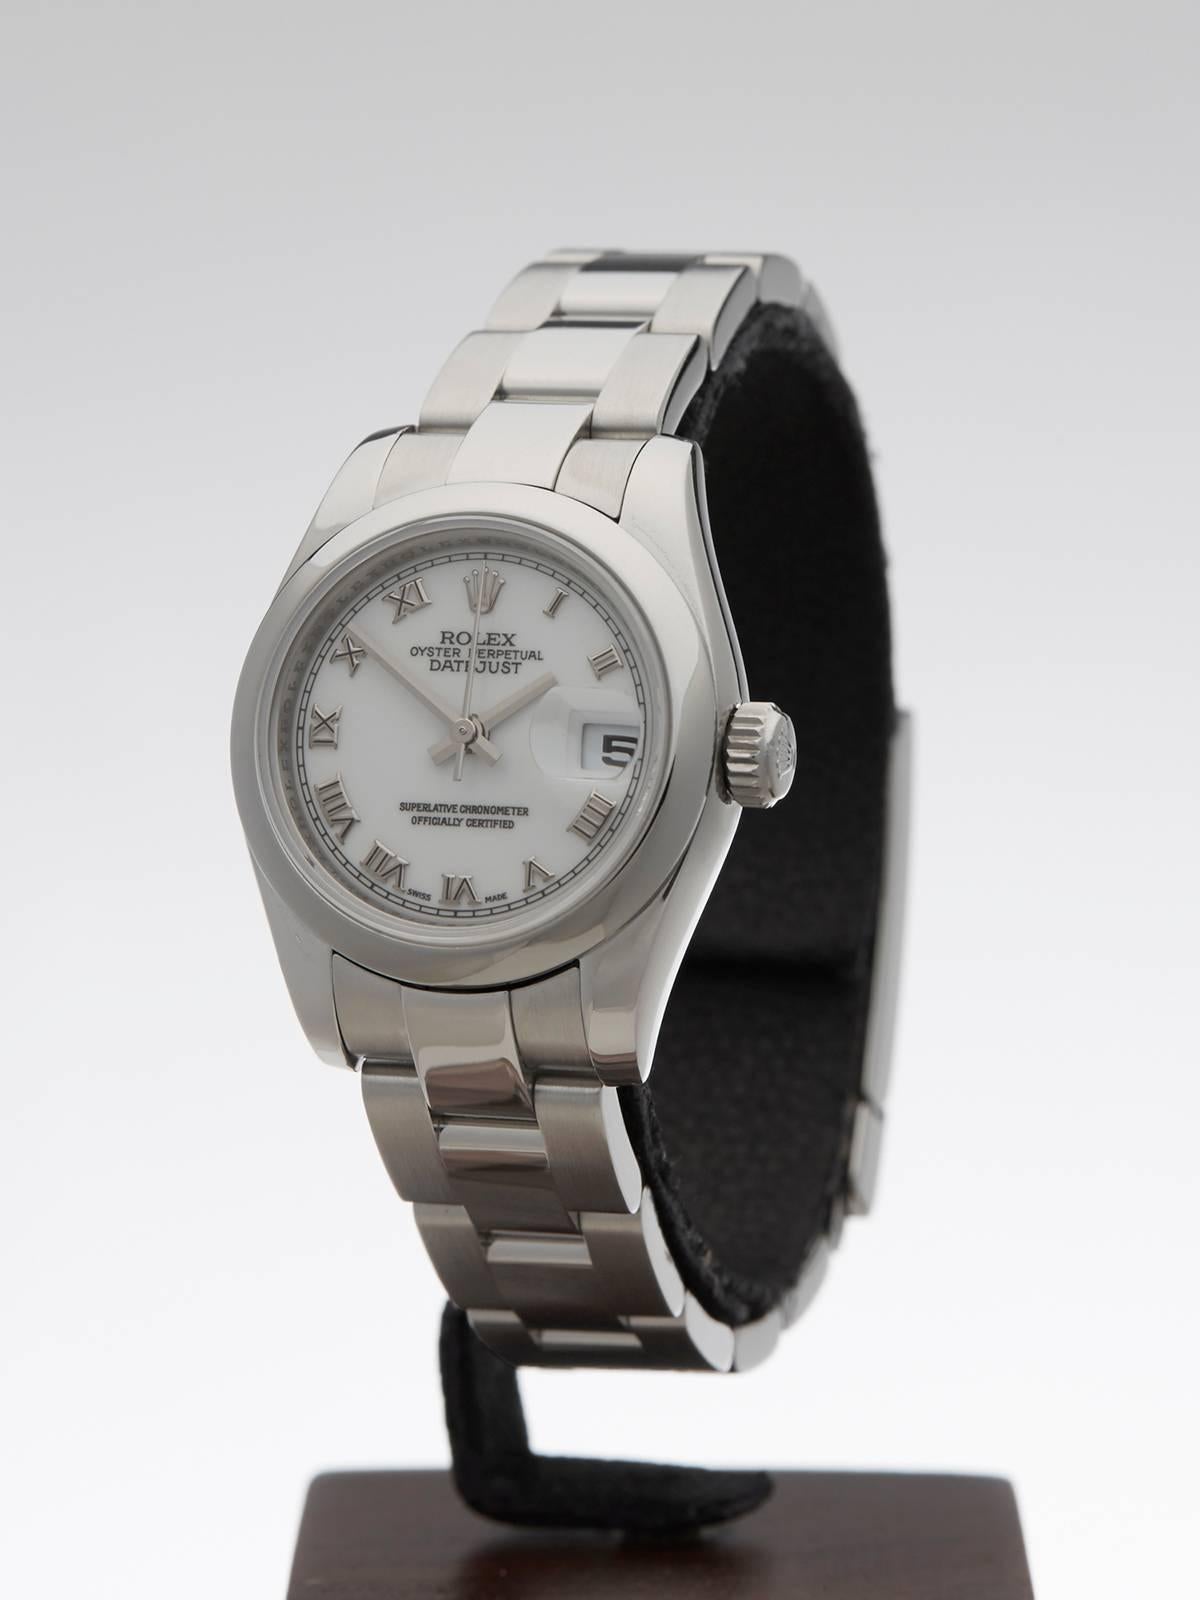 
REF	W3222
MODEL NUMBER	179160
SERIAL NUMBER	Z12****
CONDITION	9 - Excellent condition
GENDER	Ladies
AGE	2006
CASE DIAMETER	26 mm
CASE SIZE	26mm
BOX & PAPERS	Box, manuals & guarantee
MOVEMENT	Automatic
CASE	Stainless Steel
DIAL	White